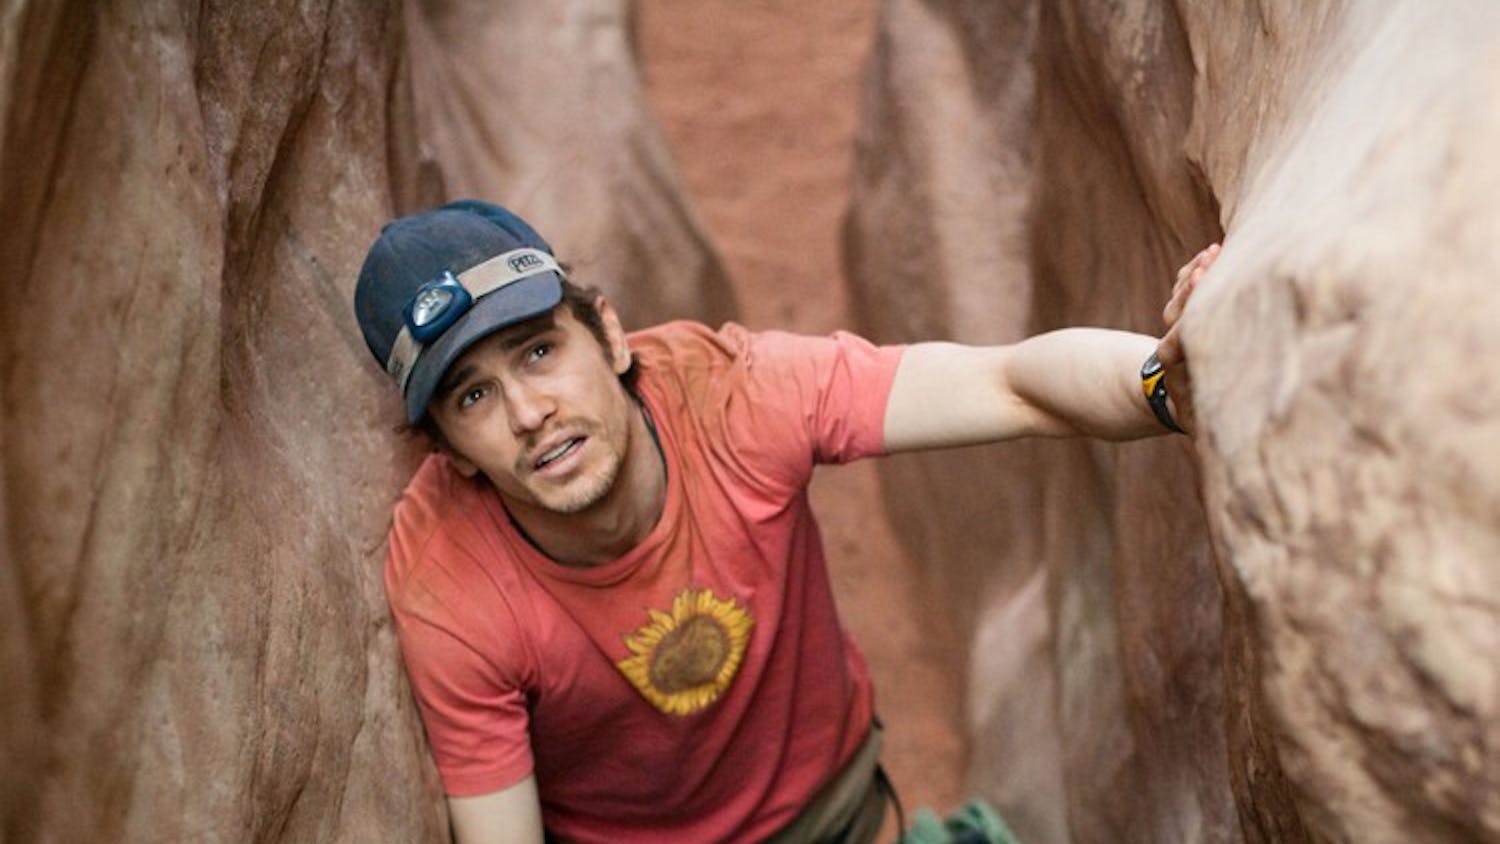 BETWEEN A ROCK AND A HARD PLACE â€” The latest drama directed by Danny Boyle, â€œ127 Hours,â€ follows Aron Ralston (James Franco) as he finds himself trapped in a canyon. 